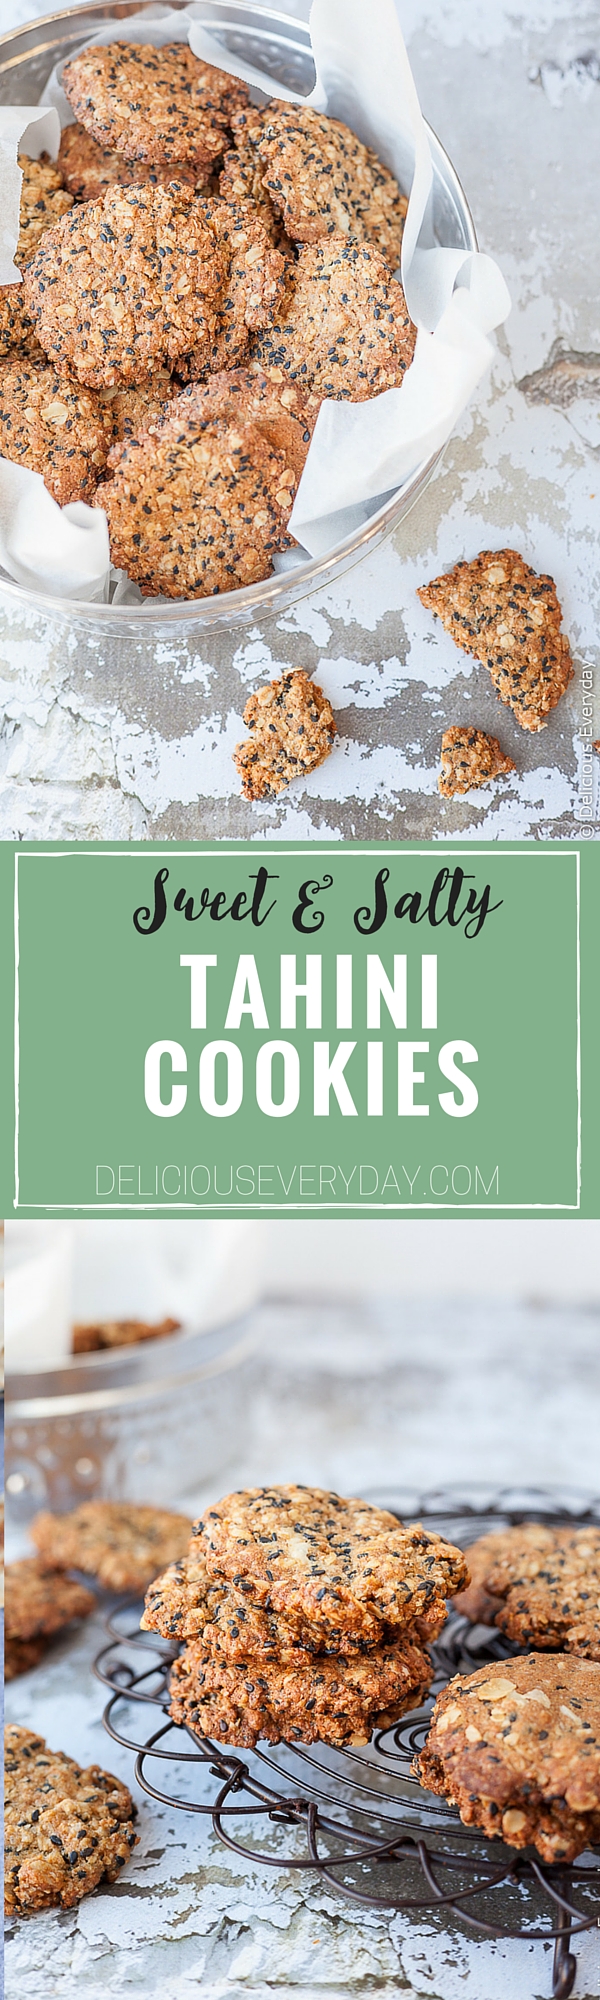 Sweet and salty vegan tahini cookies - Not too sweet, with a hint of saltiness these sesame tahini cookies are perfect for afternoon snacking. | DeliciousEveryday.com